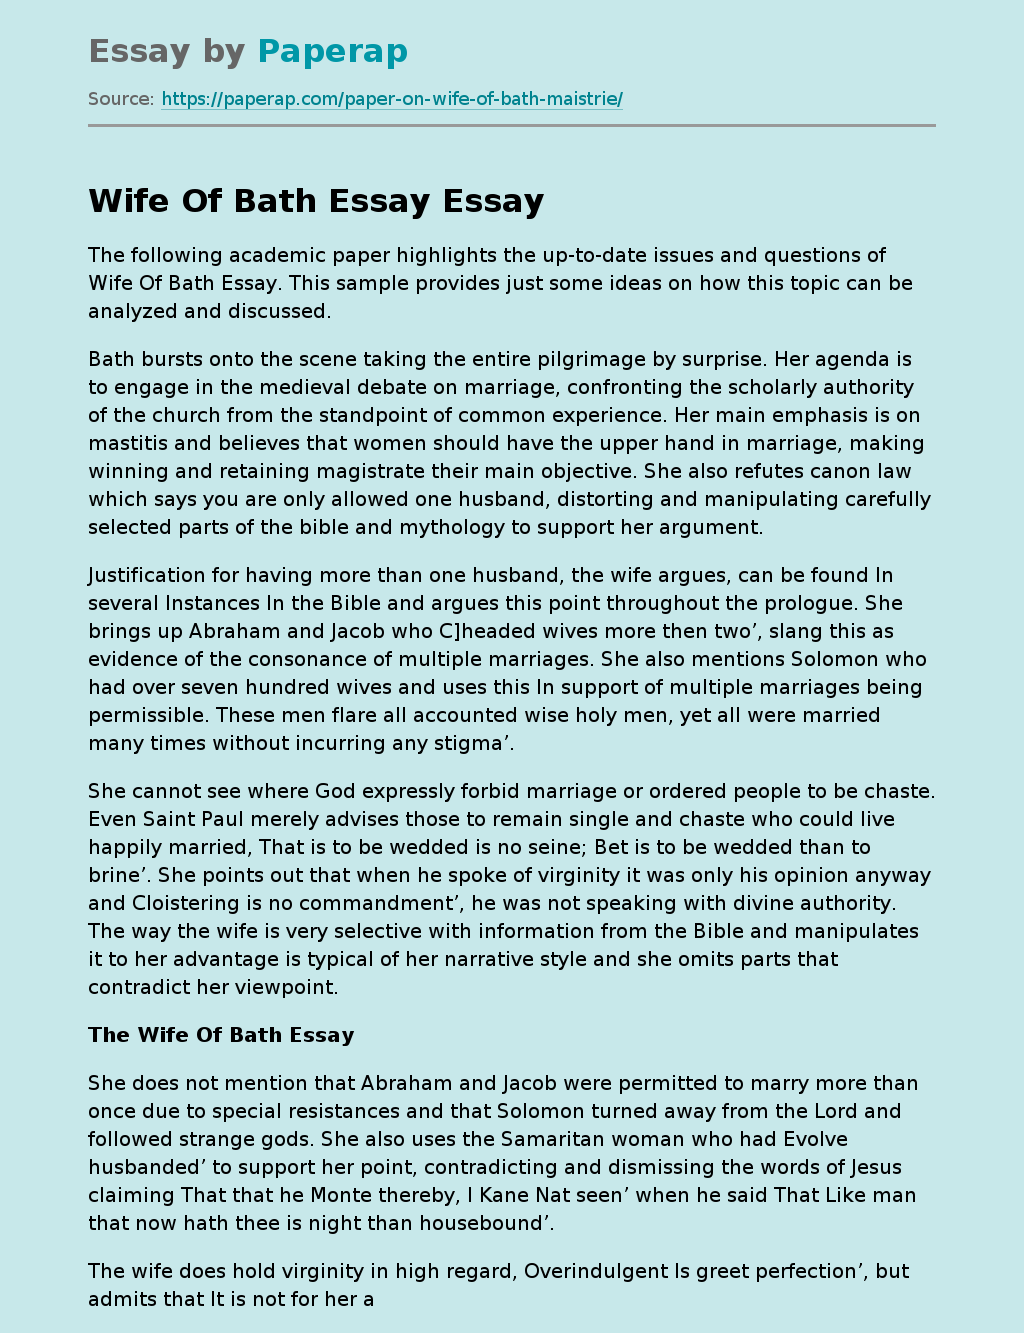 Up-to-Date Issues in Wife of Bath Essay